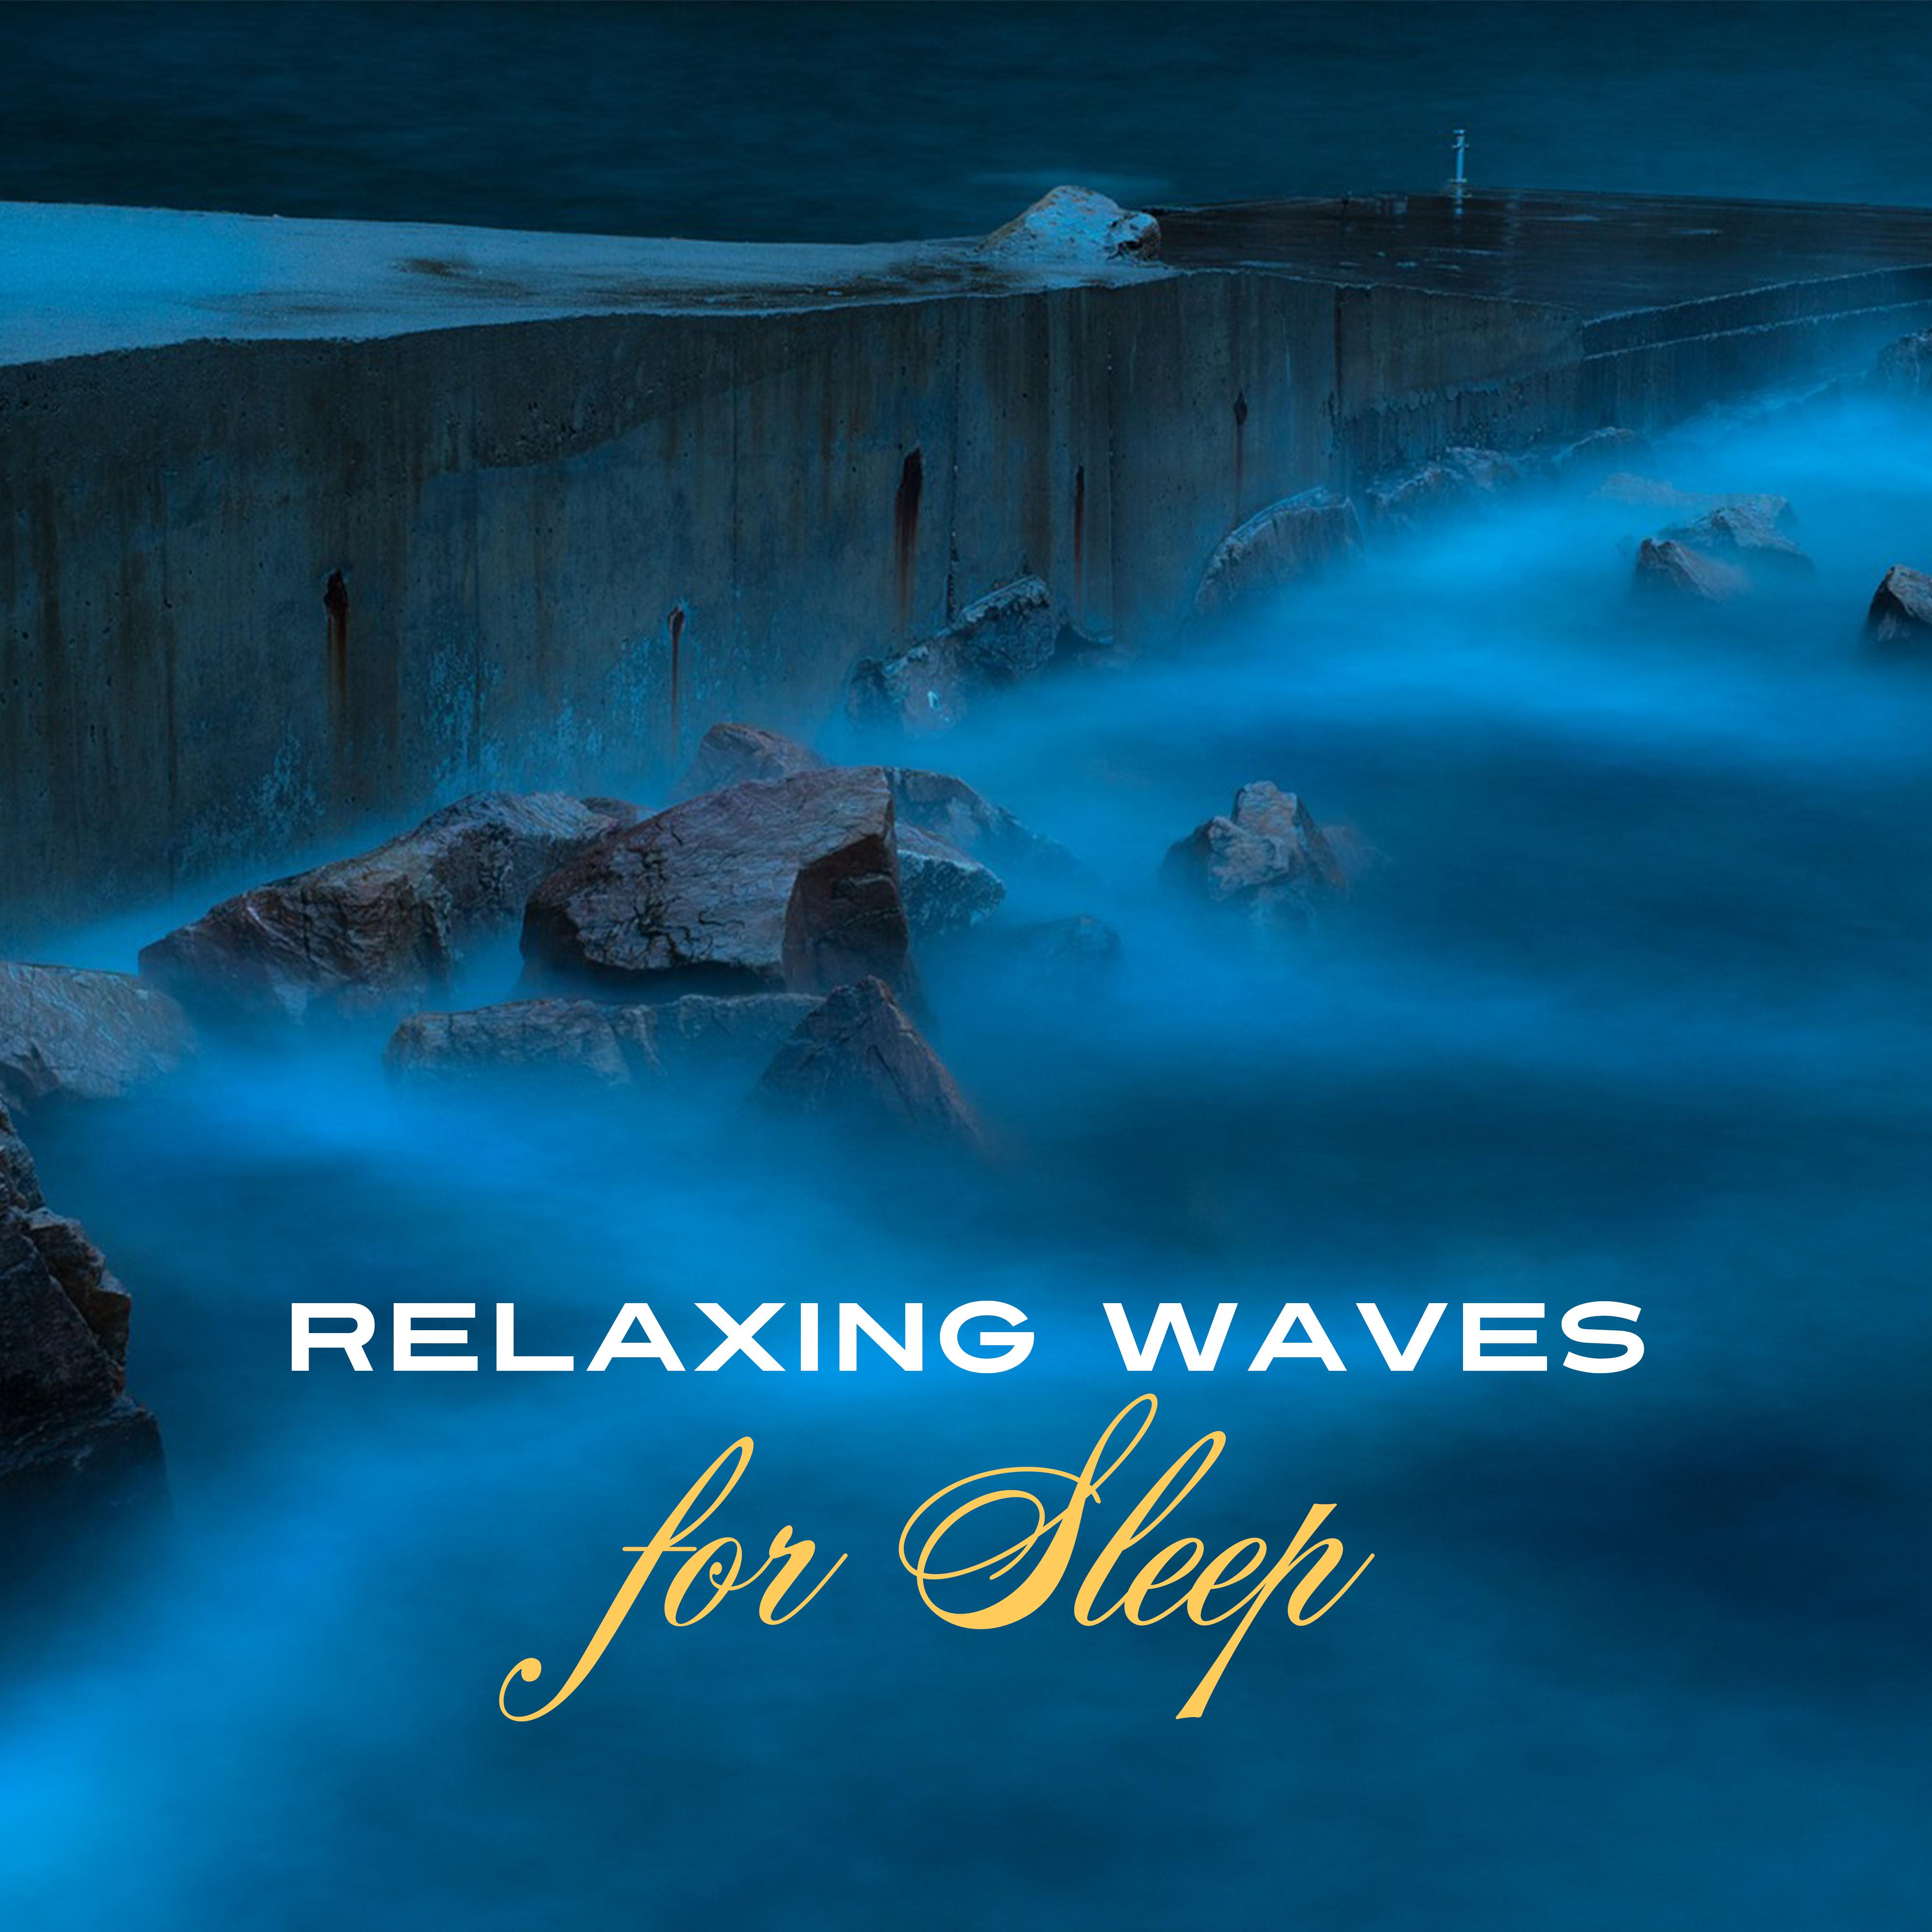 Relaxing Waves for Sleep – Relaxation Bedtime, Soothing Nature Sounds to Bed, Relief, Ocean Dreams, Healing Music at Goodnight, Sweet Dreams, Calm Down